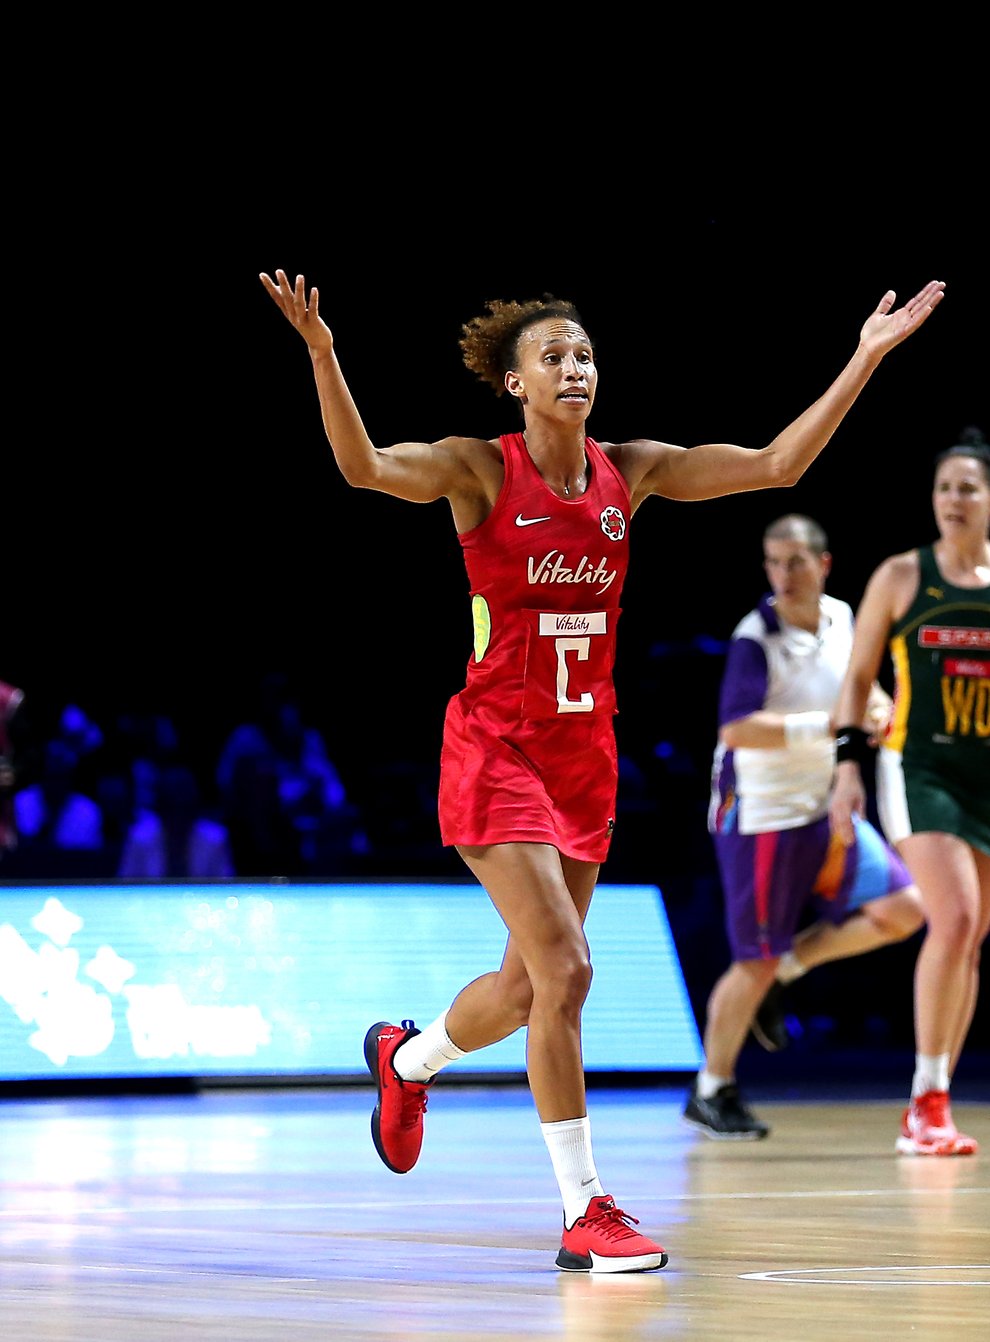 Guthrie in action for the Roses at the Vitality Netball World Cup in Liverpool (PA Images)